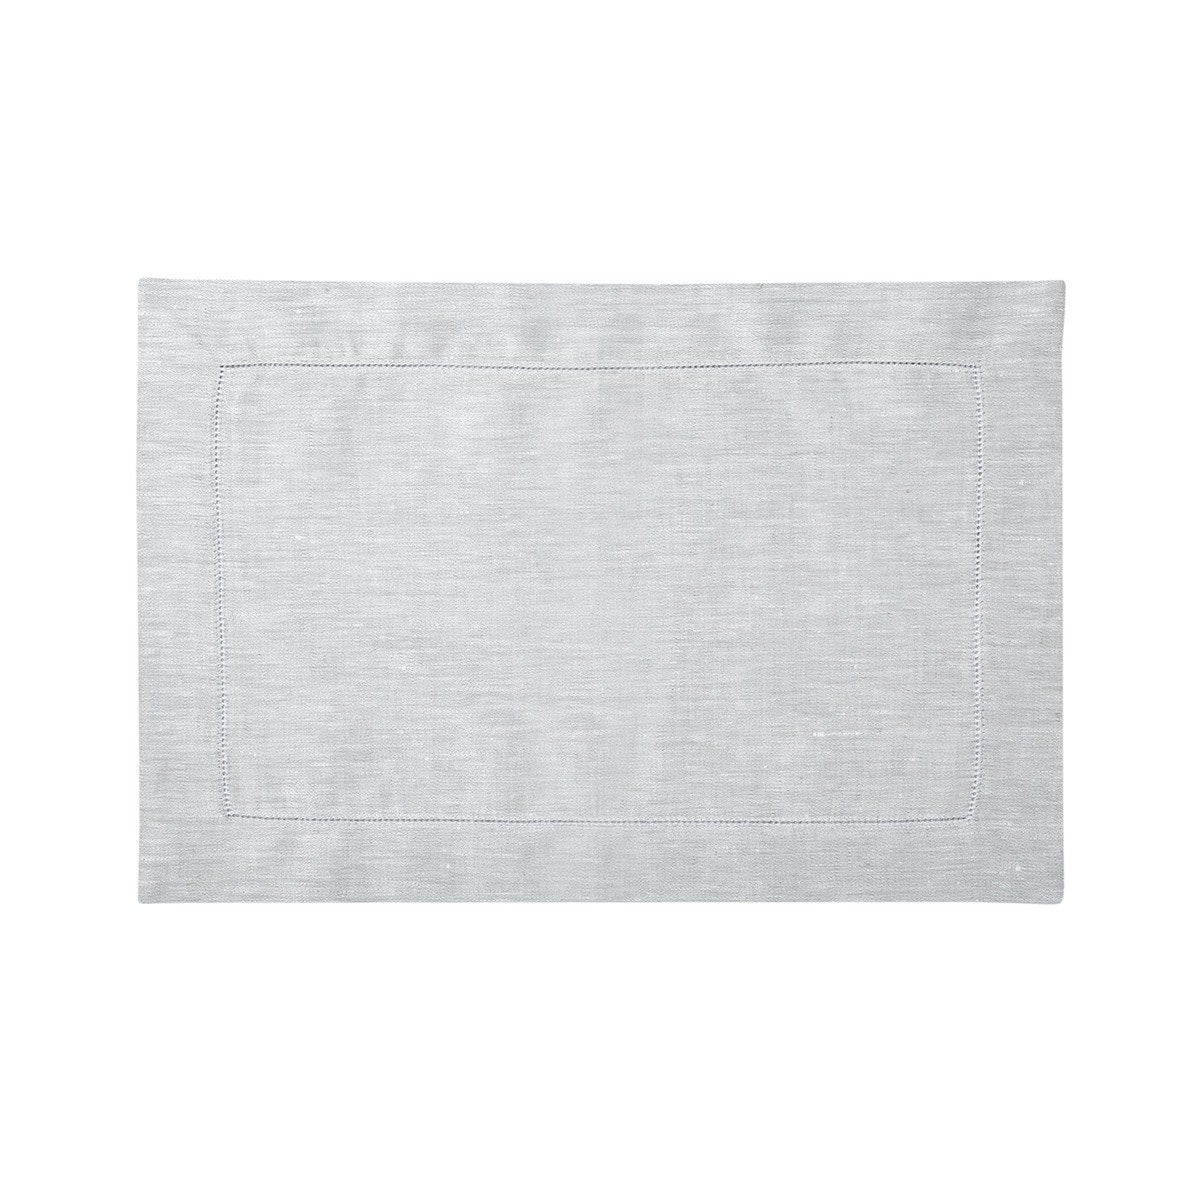 Liso Silver Table Linens by Yves Delorme Fig Linens Light Gray placemat